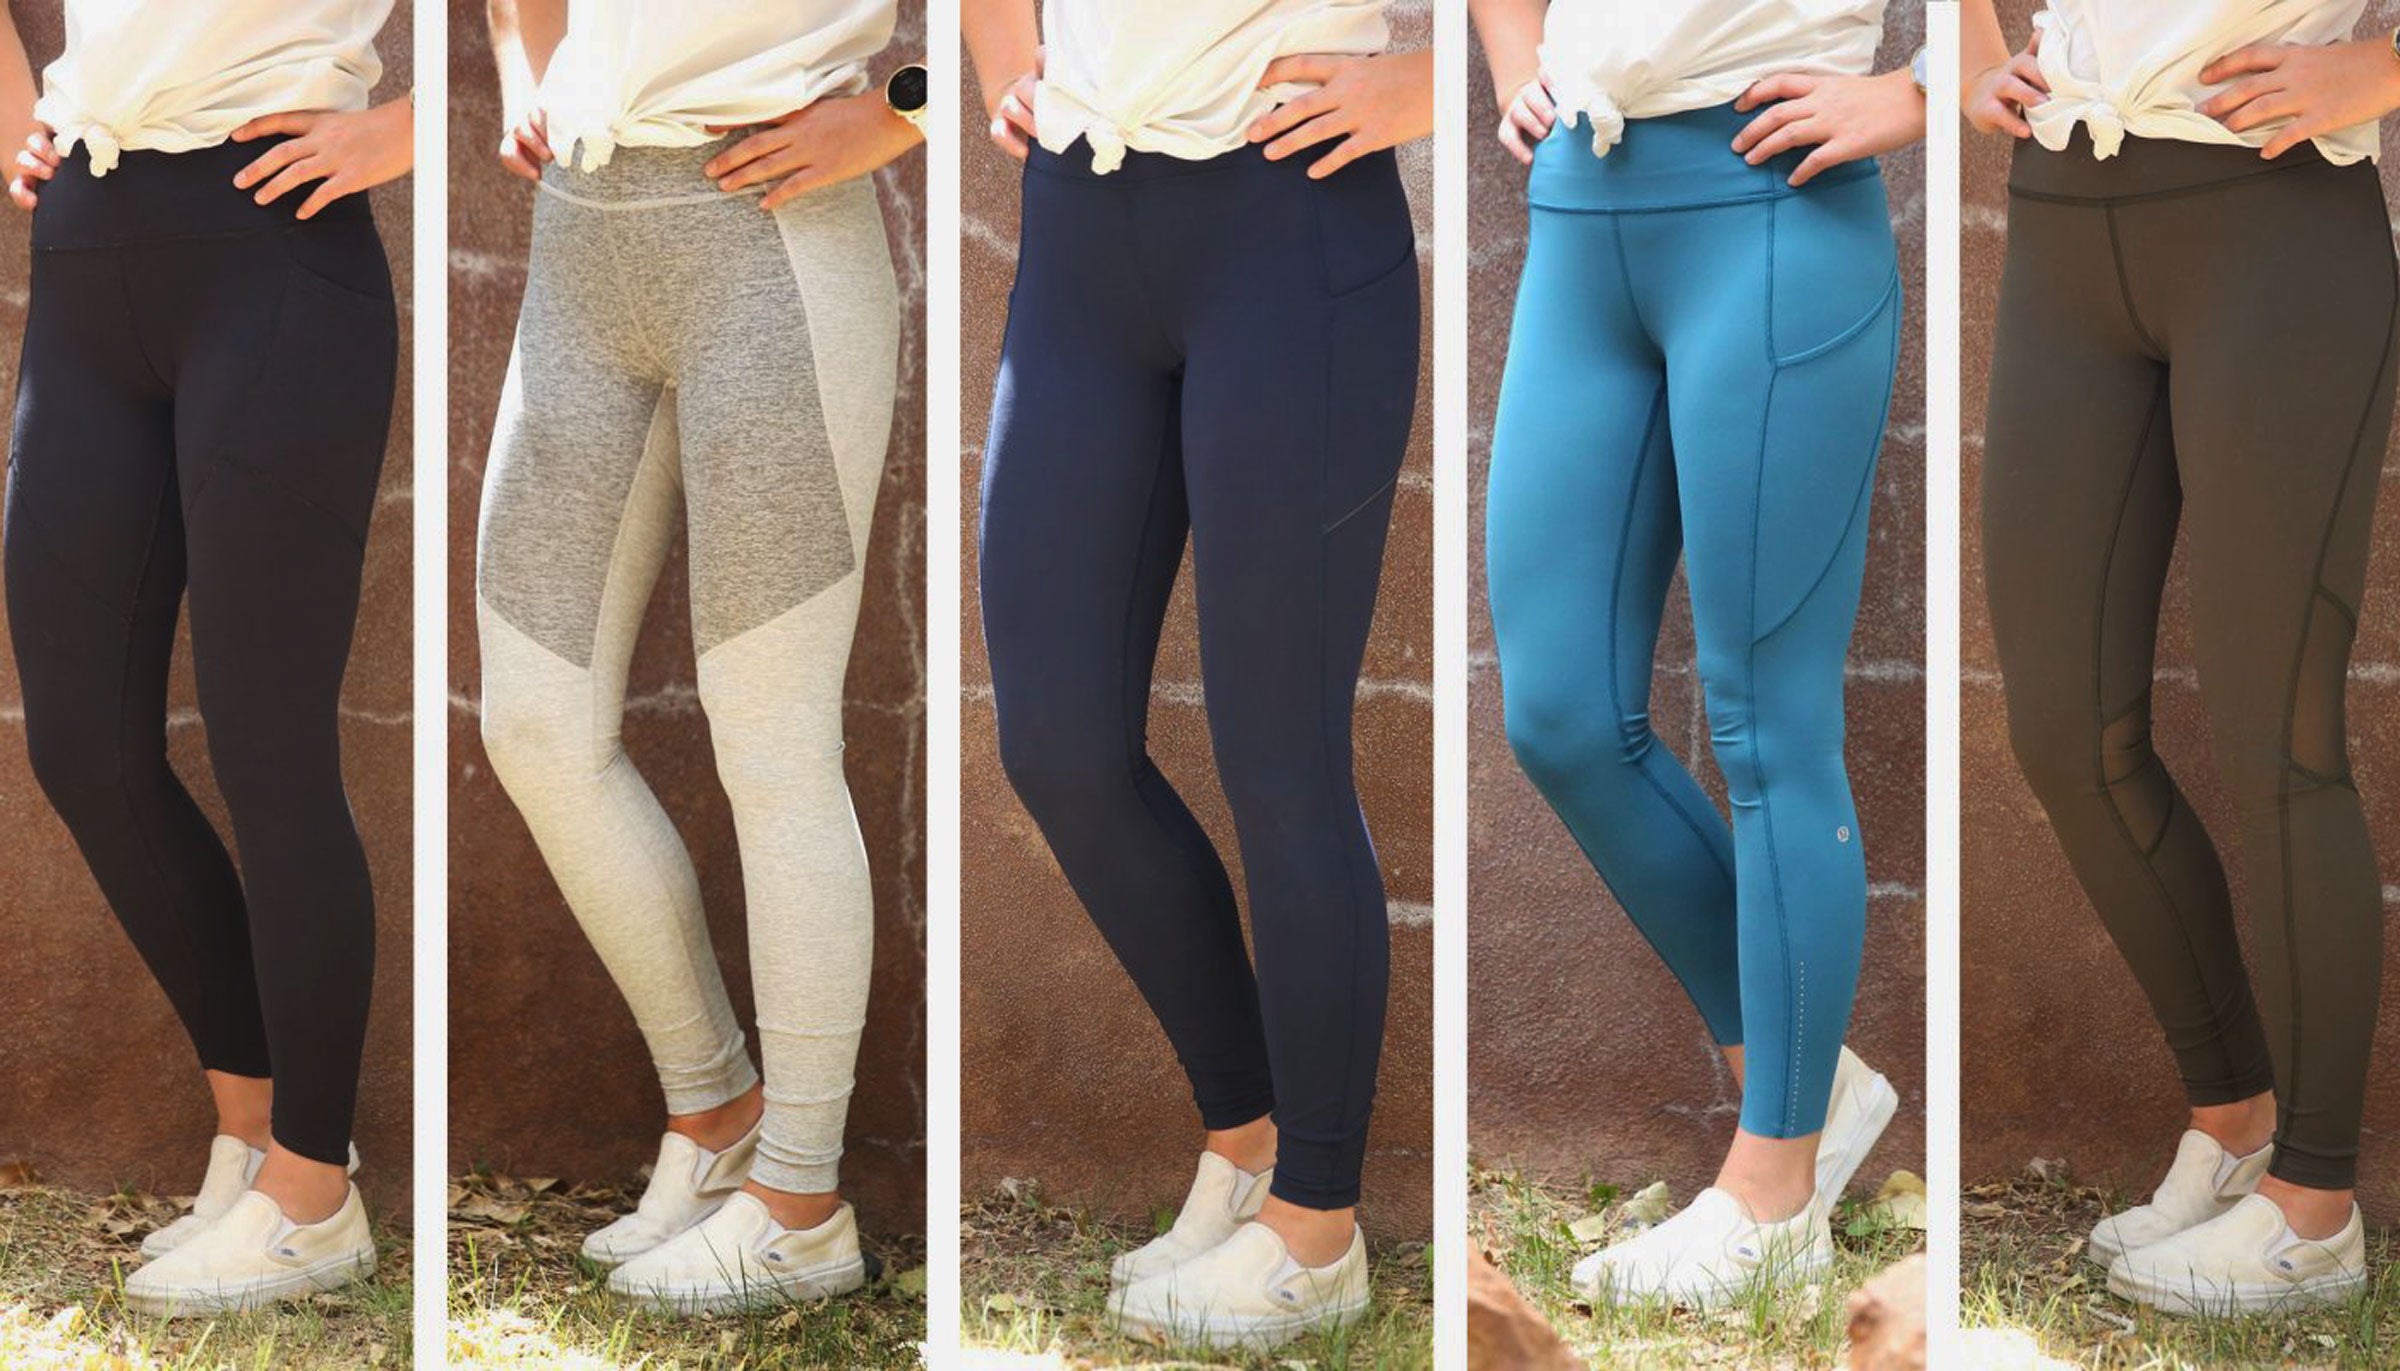 What's the best way to keep leggings from falling/sliding down? - Quora